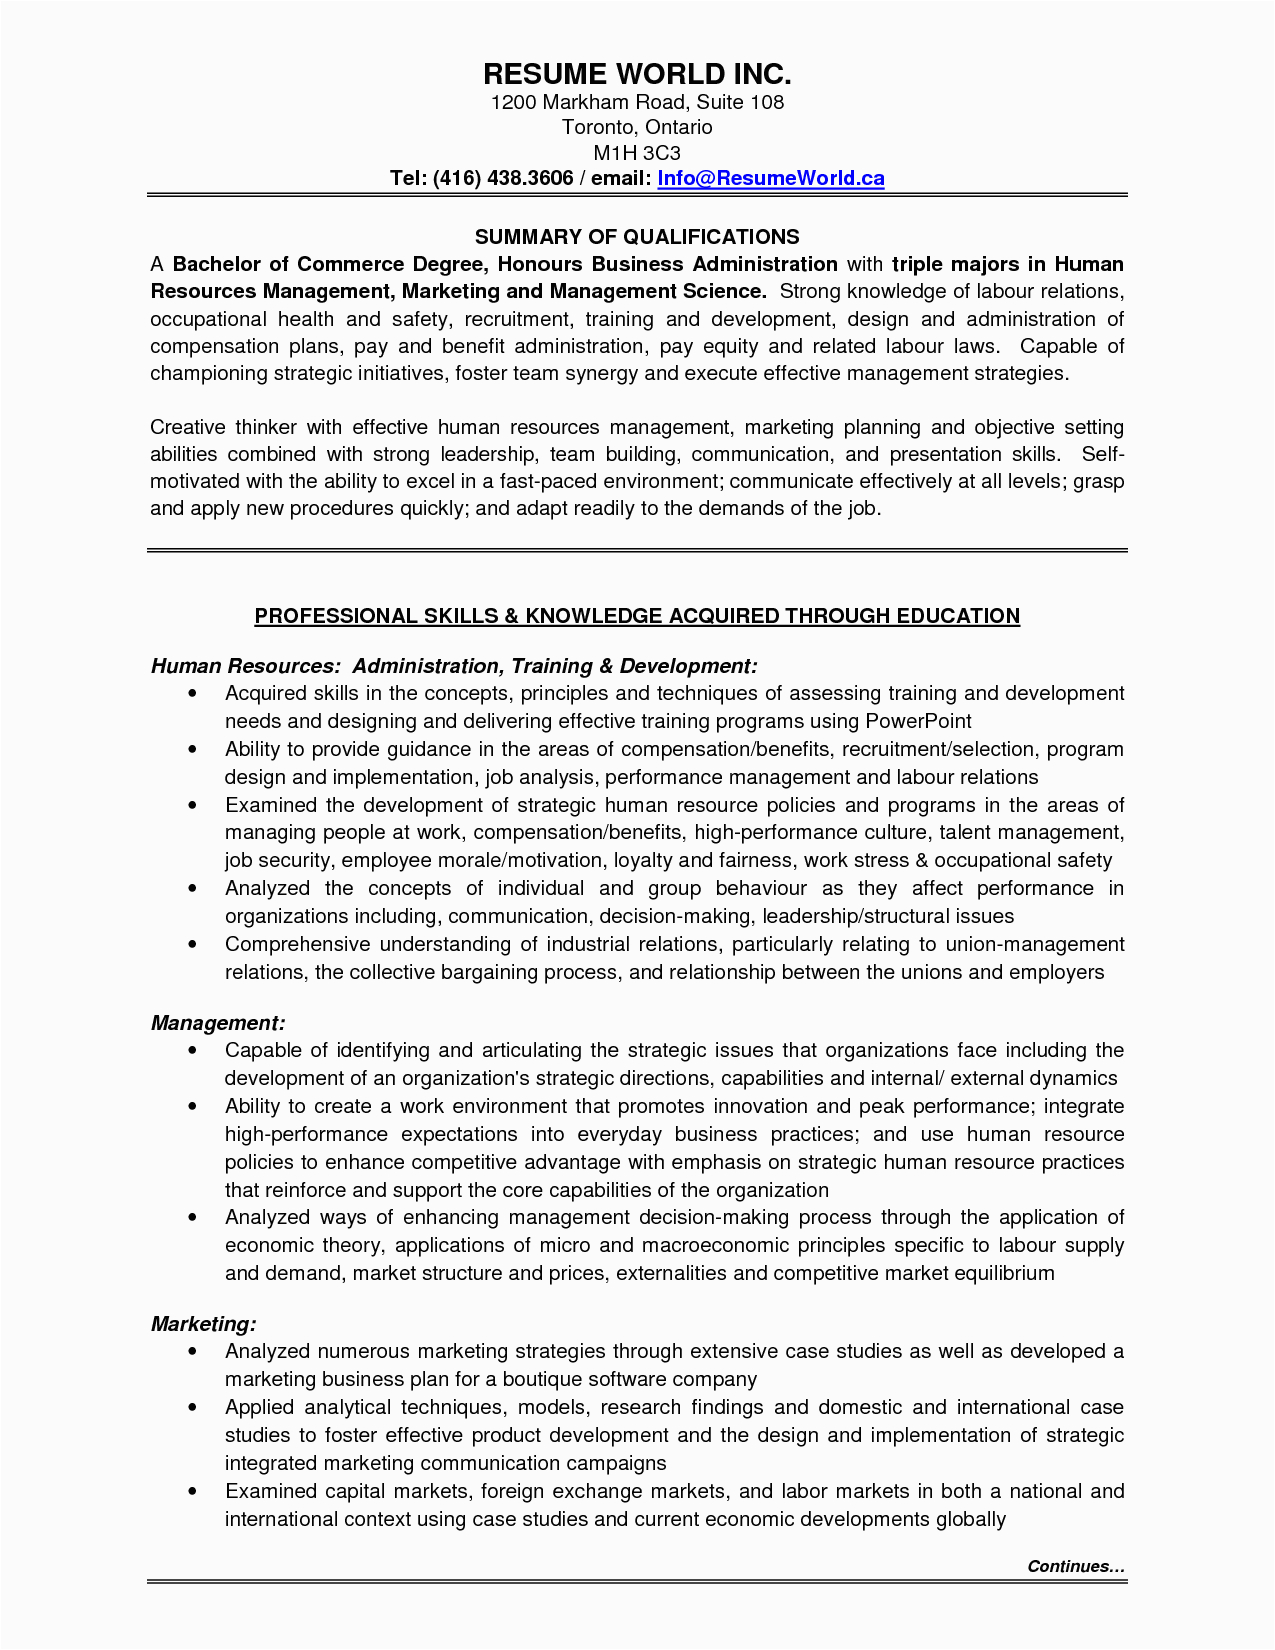 Sample Resume From Internatona Student for Entry Level Jobs Project Manager Resume Entry Level